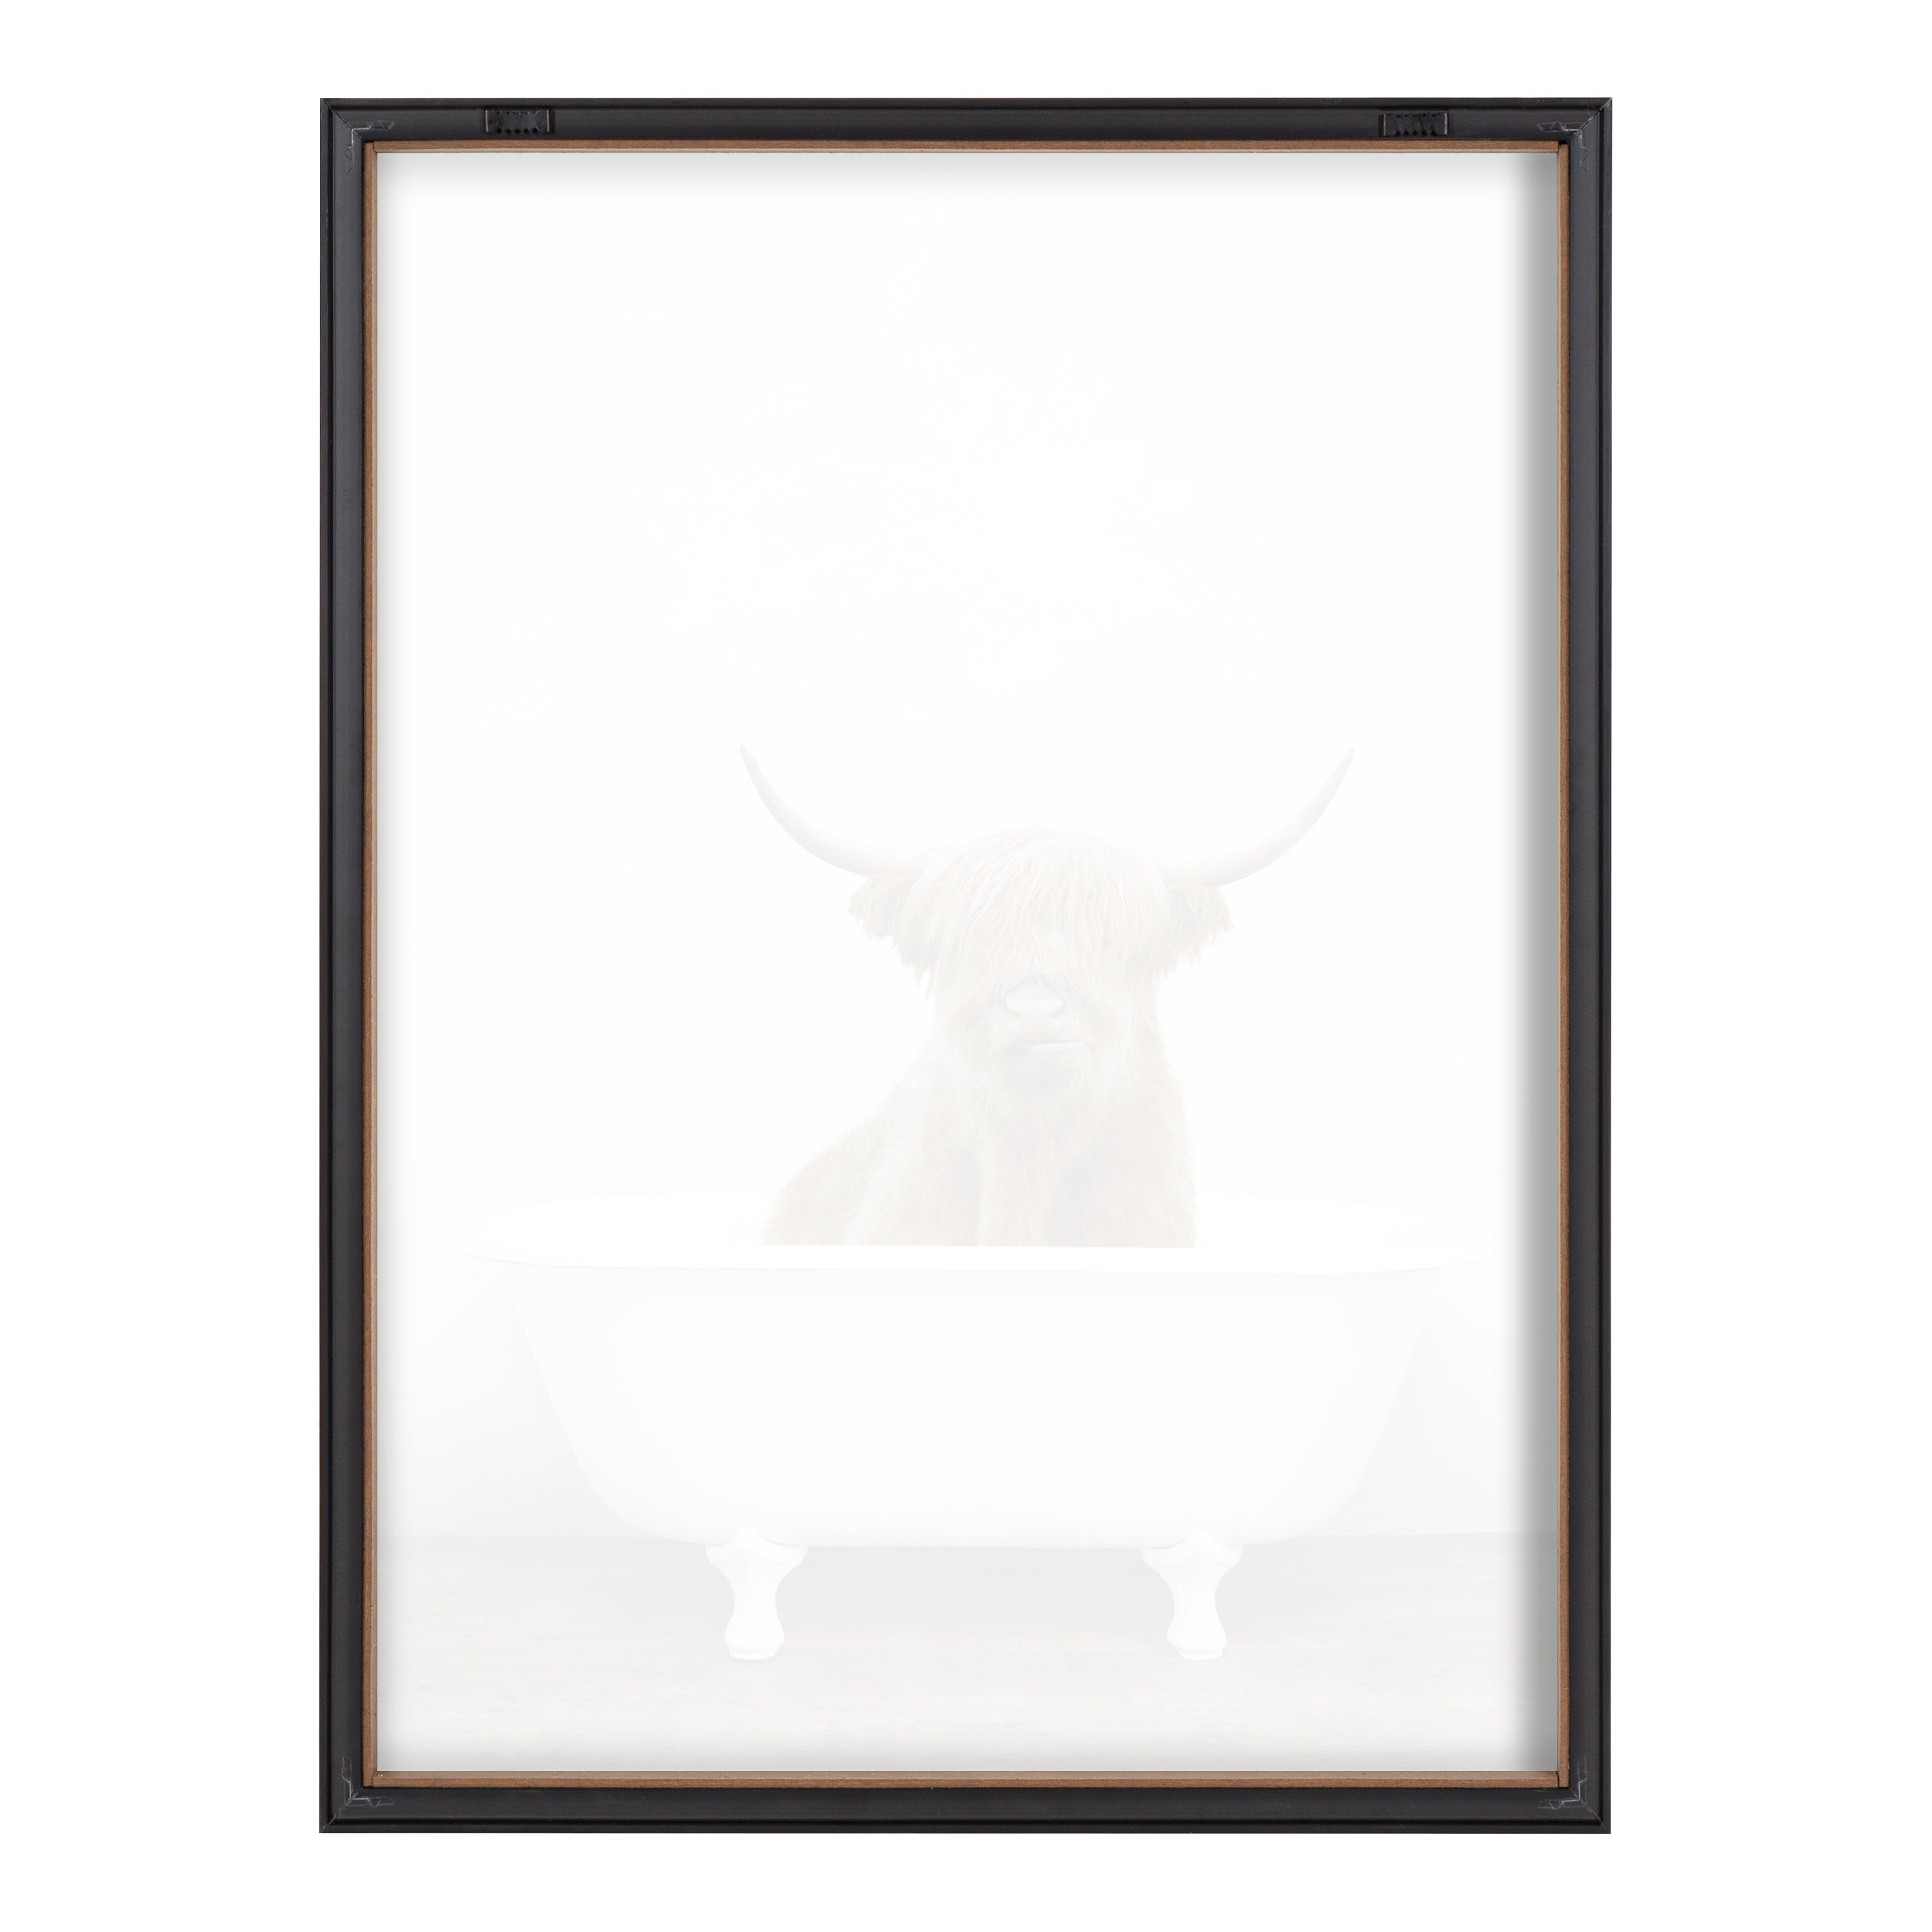 Blake Highland Cow in Tub Color Framed Printed Glass by Amy Peterson Art Studio